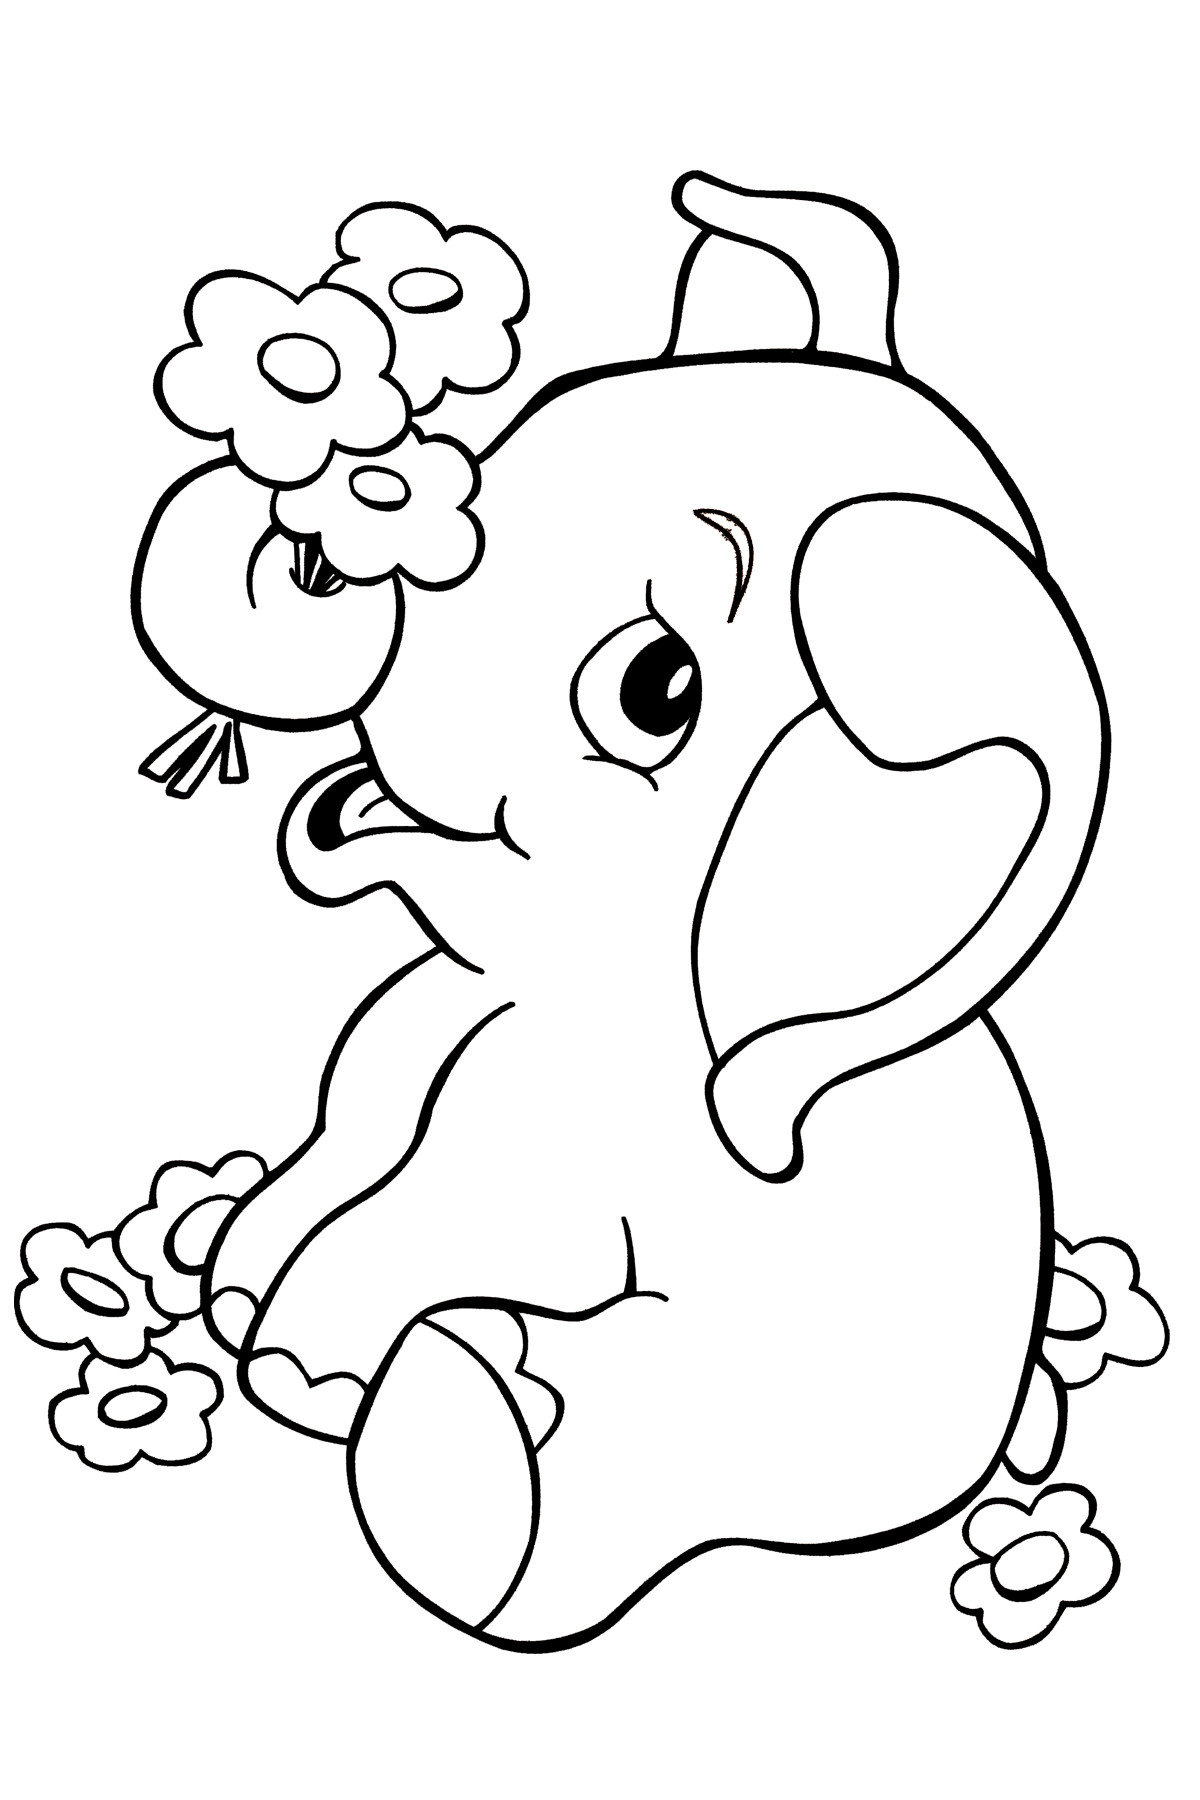 Cute Baby Elephant Coloring Pages
 Elephant Line Art Cliparts